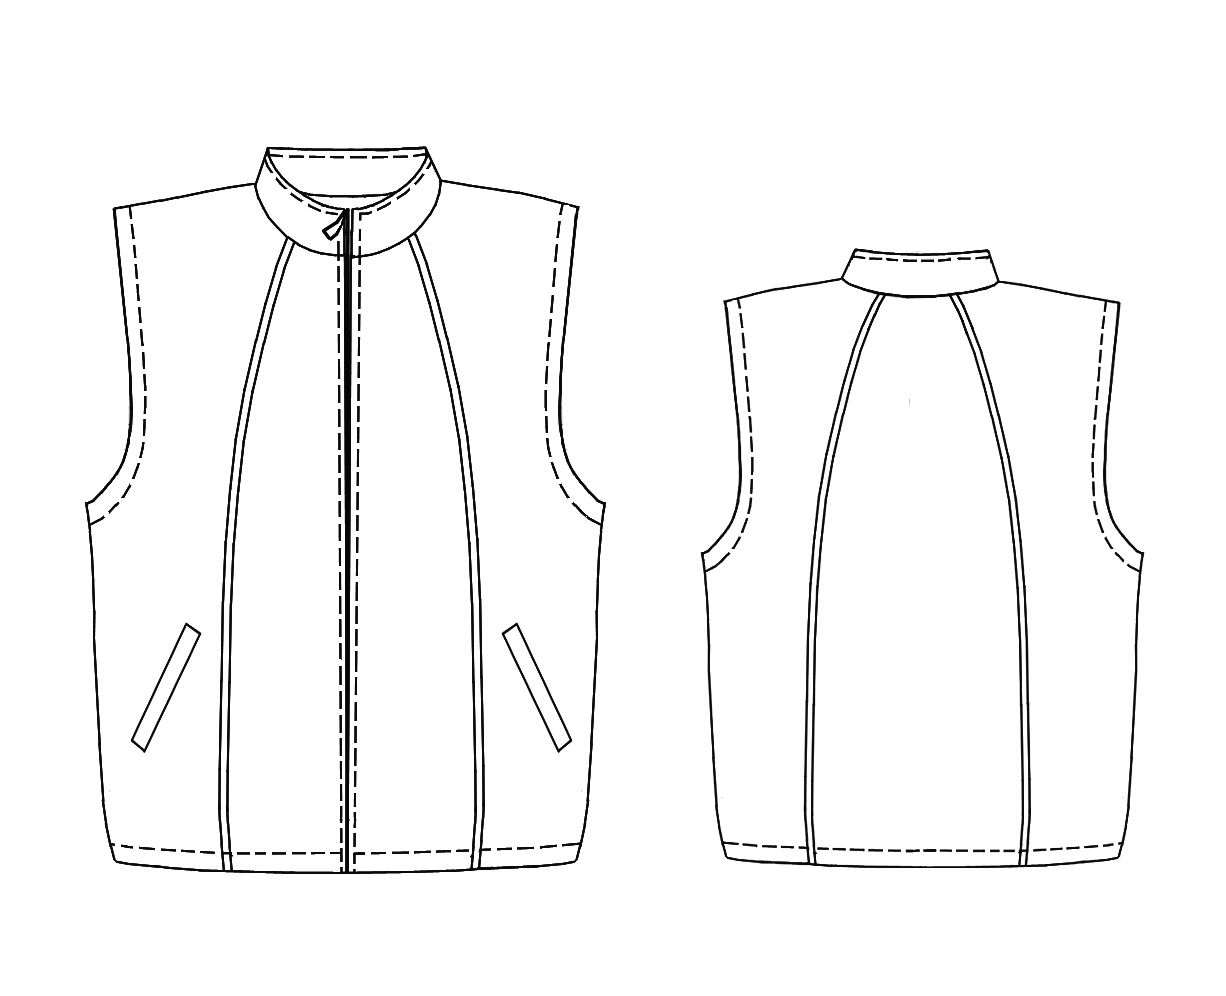 Waistcoat - Sewing Pattern #7167. Made-to-measure sewing pattern from ...